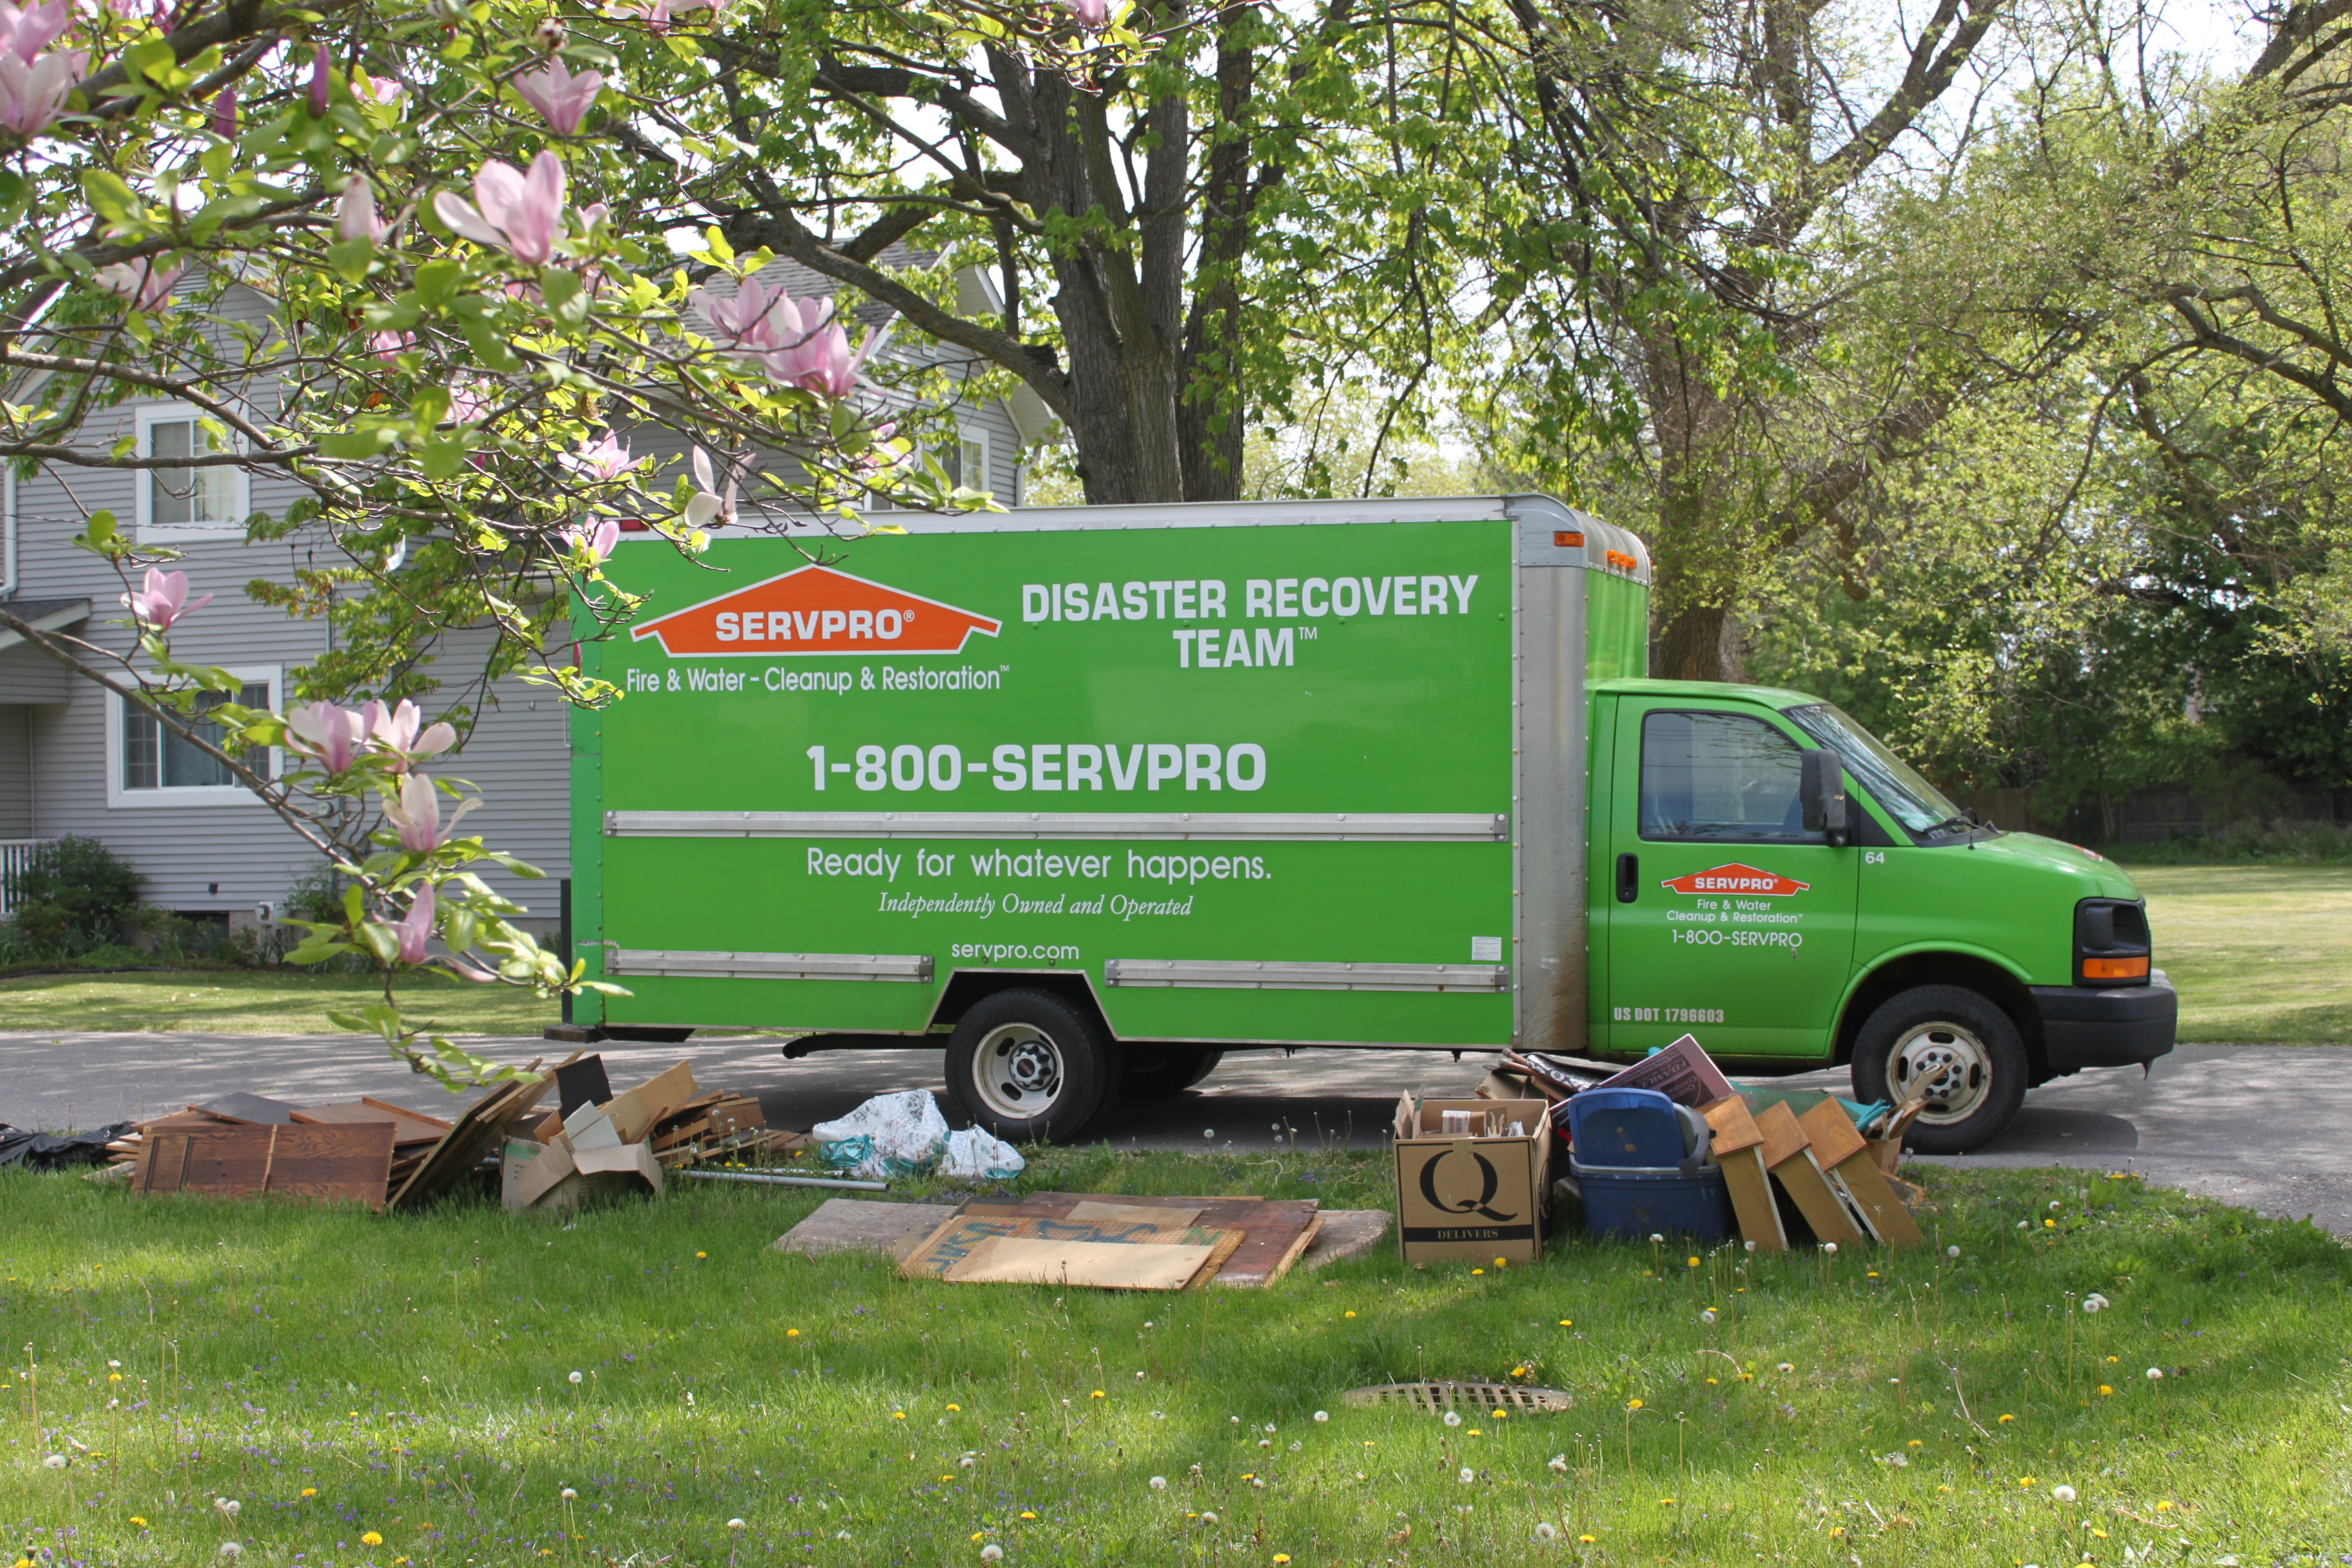 SERVPRO of Saginaw / Bay City loves to represent the #greenteam. When you see our green vehicles, you know someone in the area is receiving quality service!